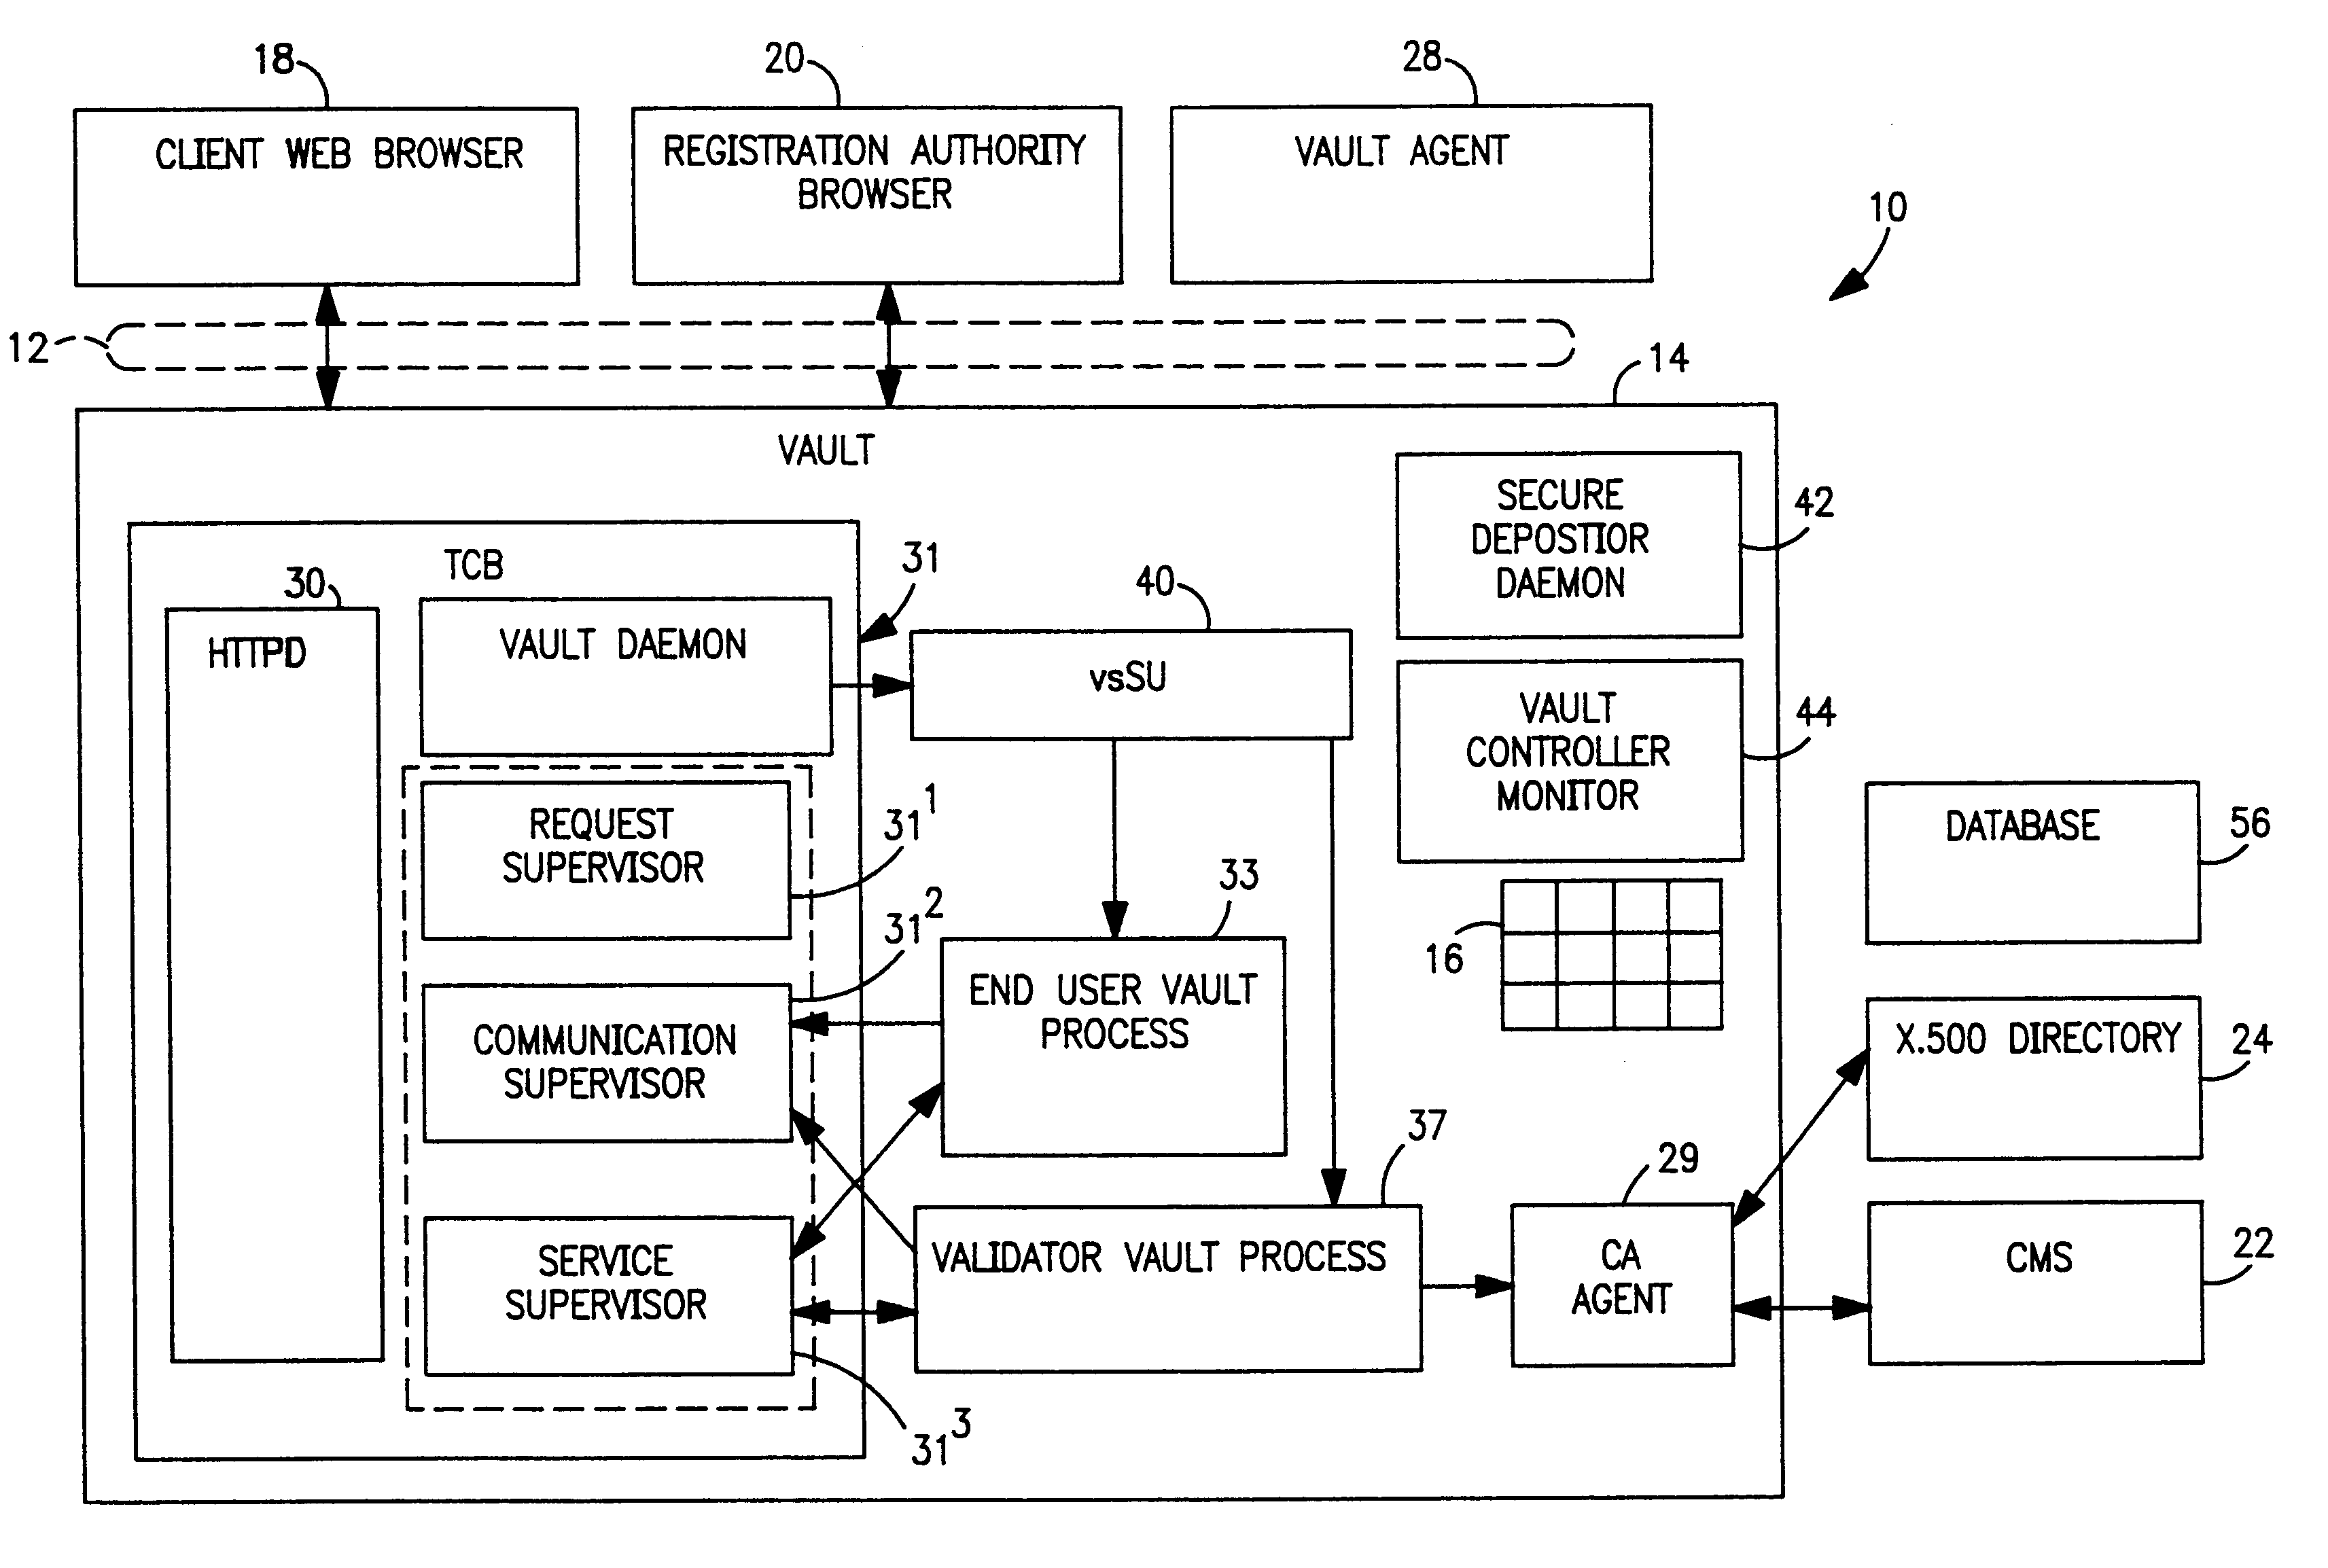 Vault controller dispatcher and methods of operation for handling interaction between browser sessions and vault processes in electronic business systems